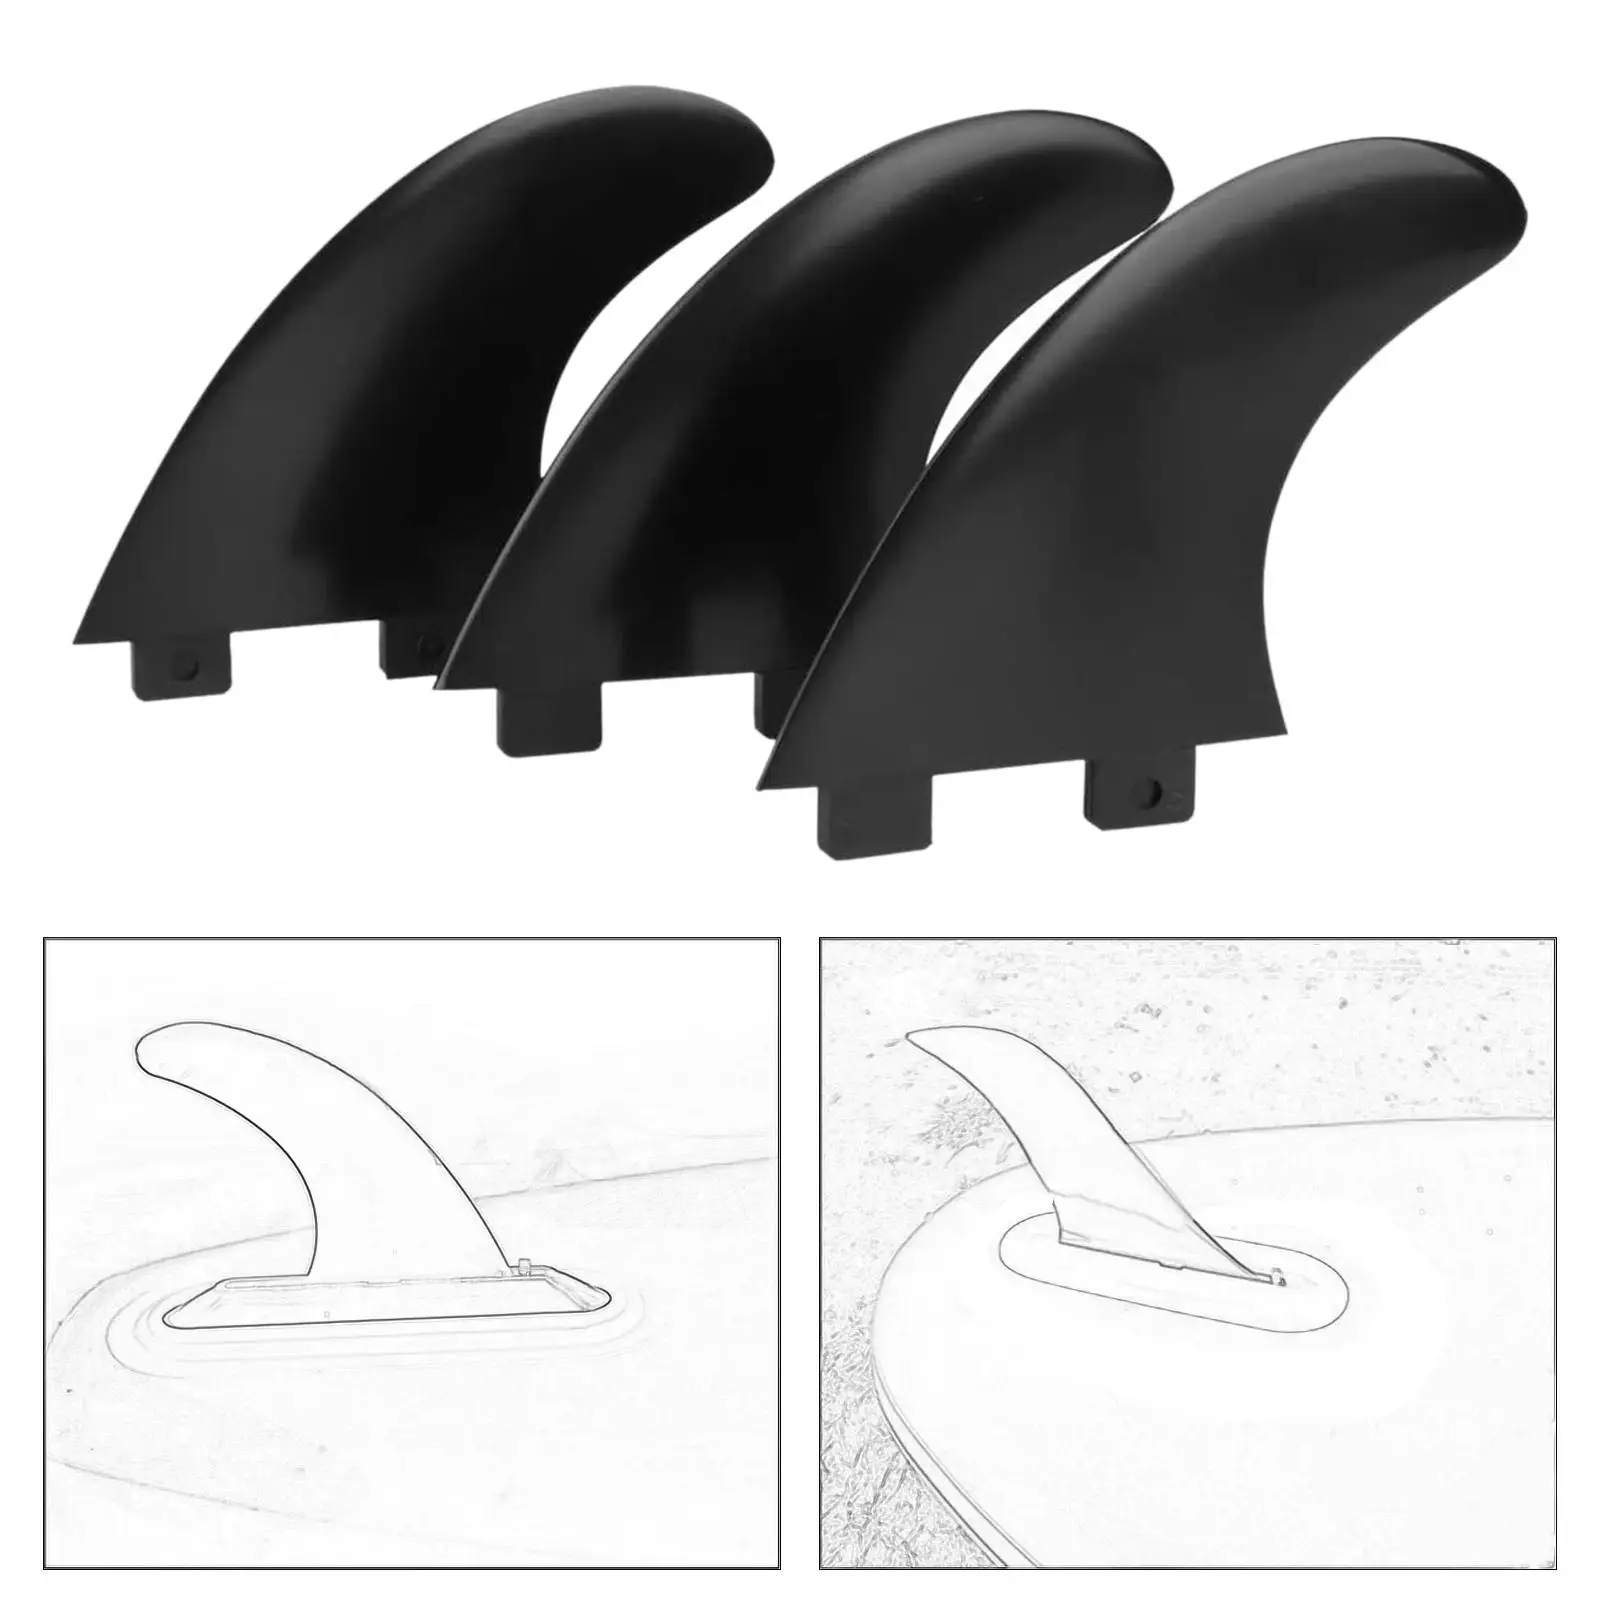 3Pcs Surfboard Fins Easy Installation Replacement Surfing Fin for Longboards Water Sports Stand up Paddleboard Dinghy Parts